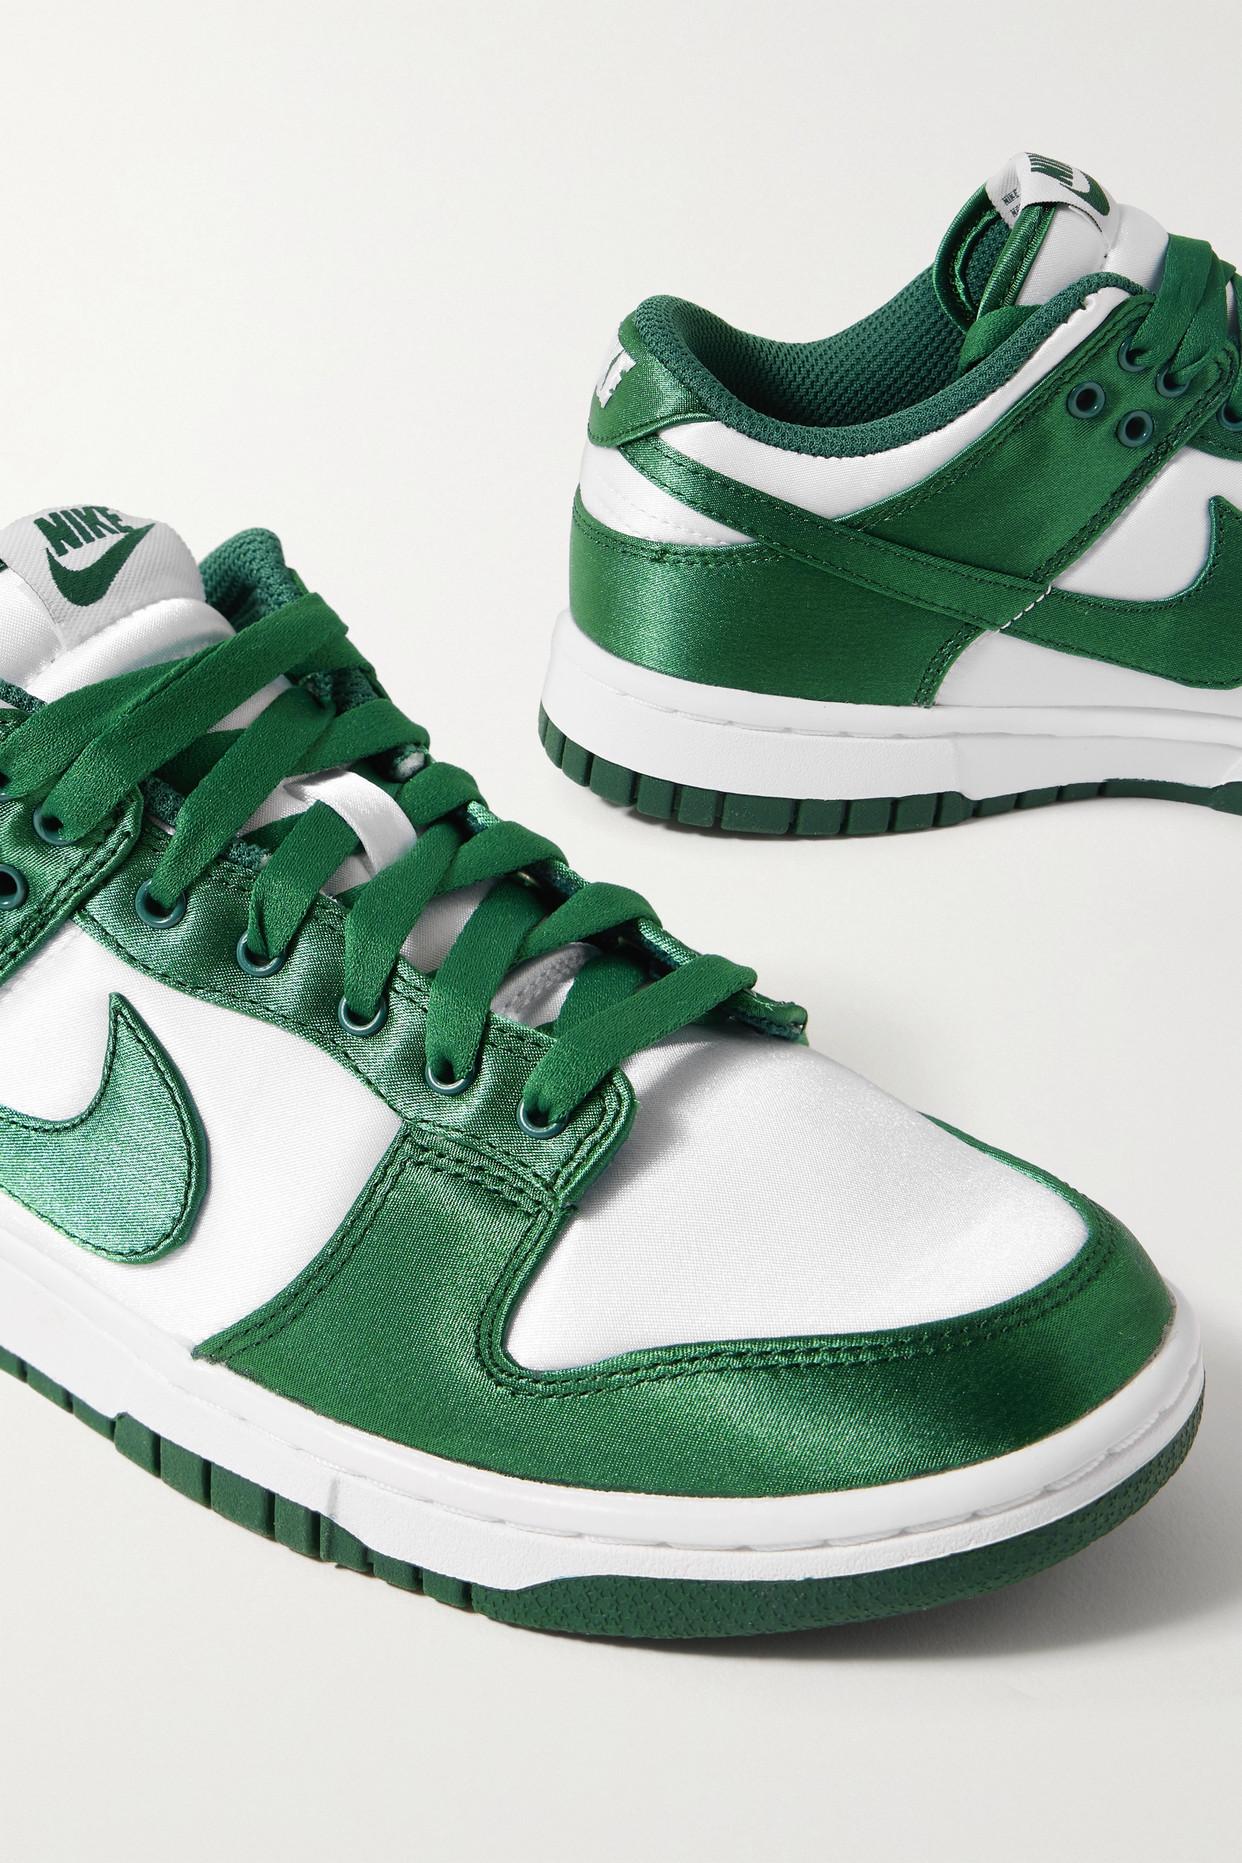 Nike Dunk Low sneakers in white and green